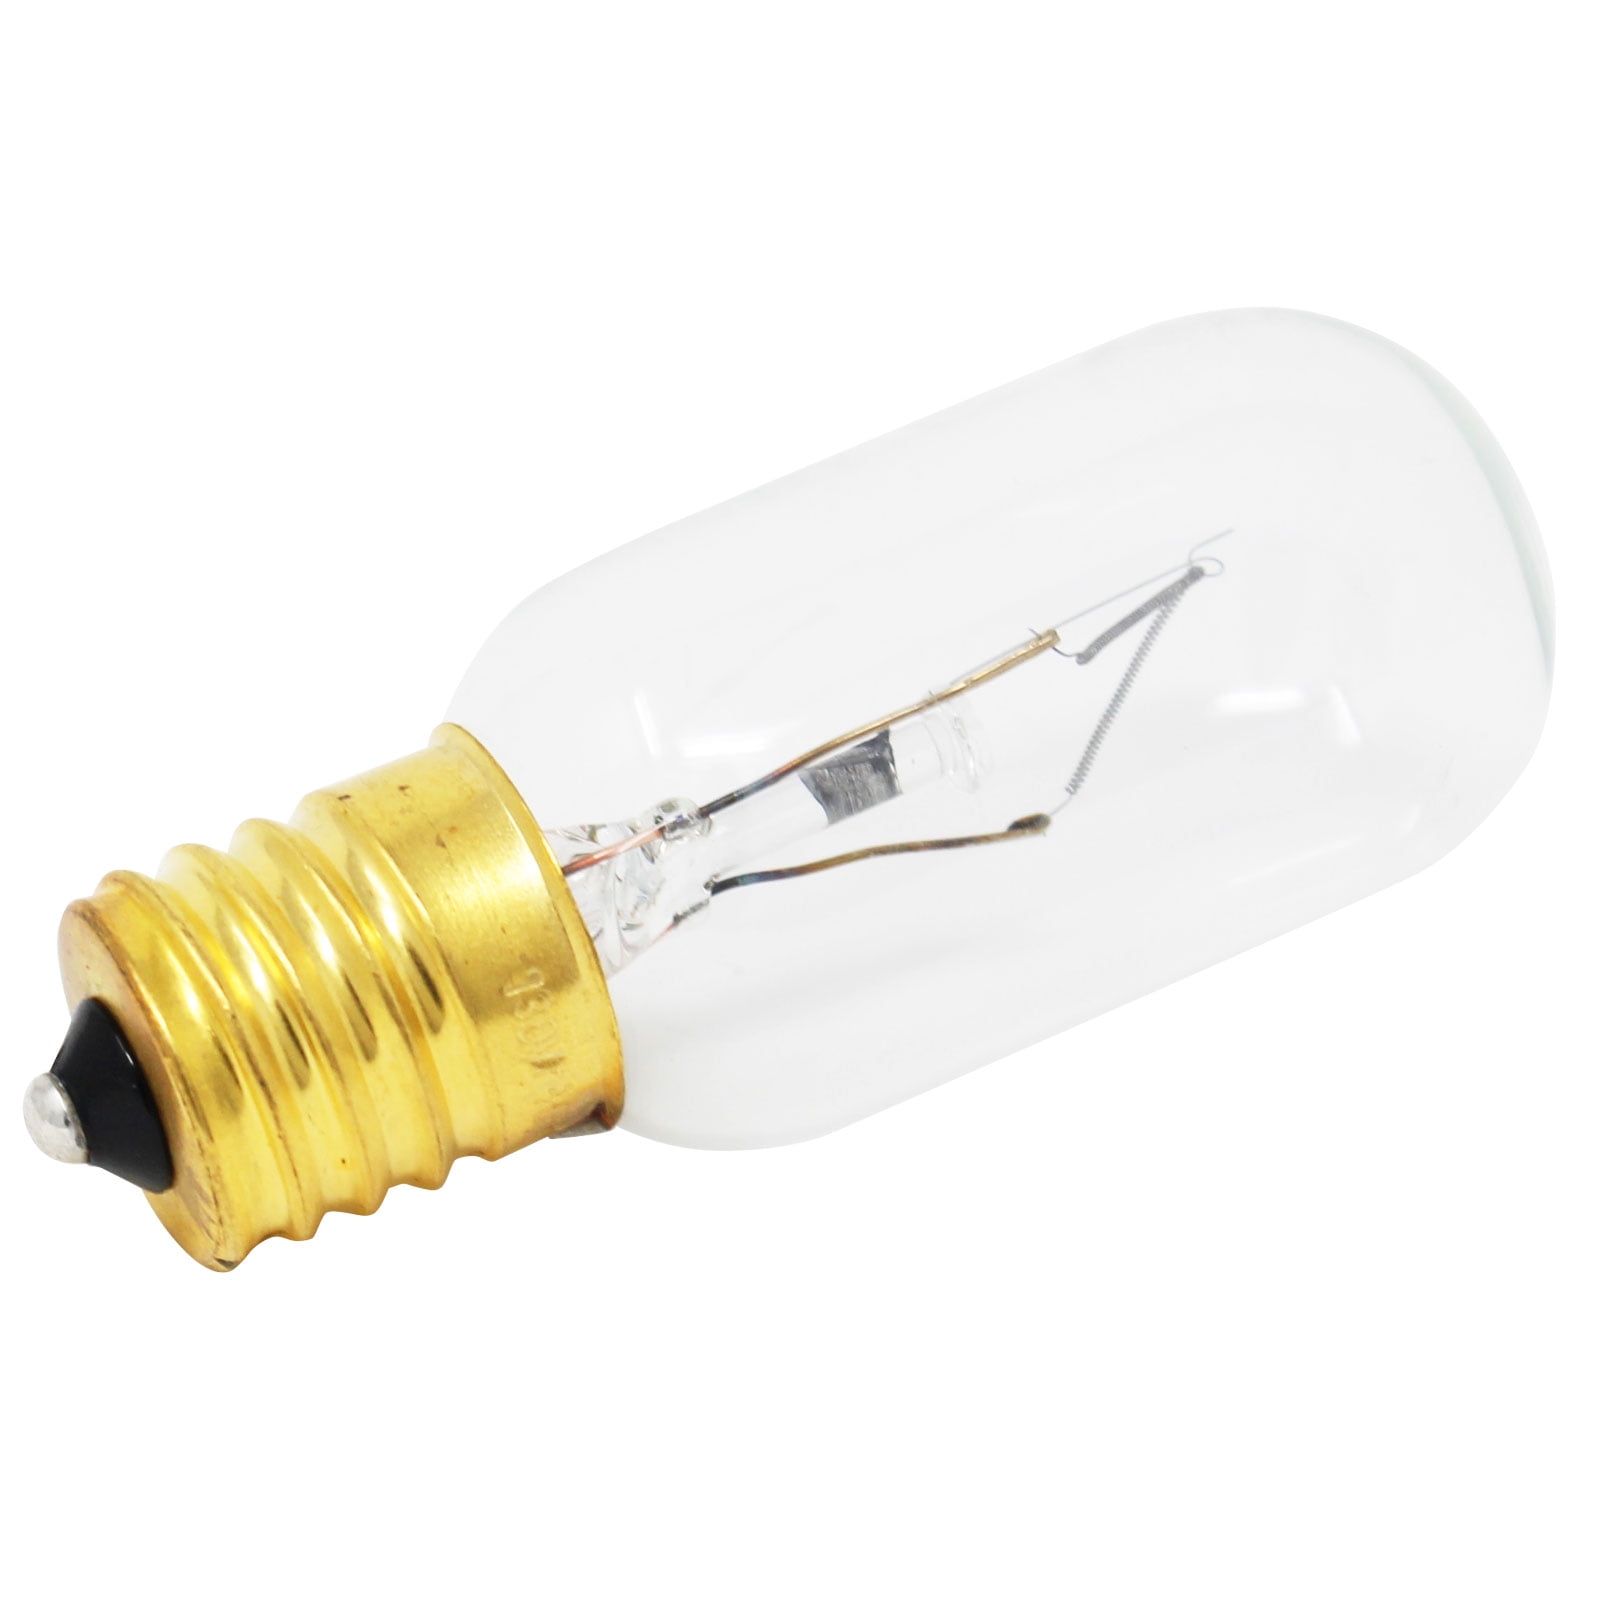 Replacement Light Bulb for General Electric WB2X4253 Microwave ...